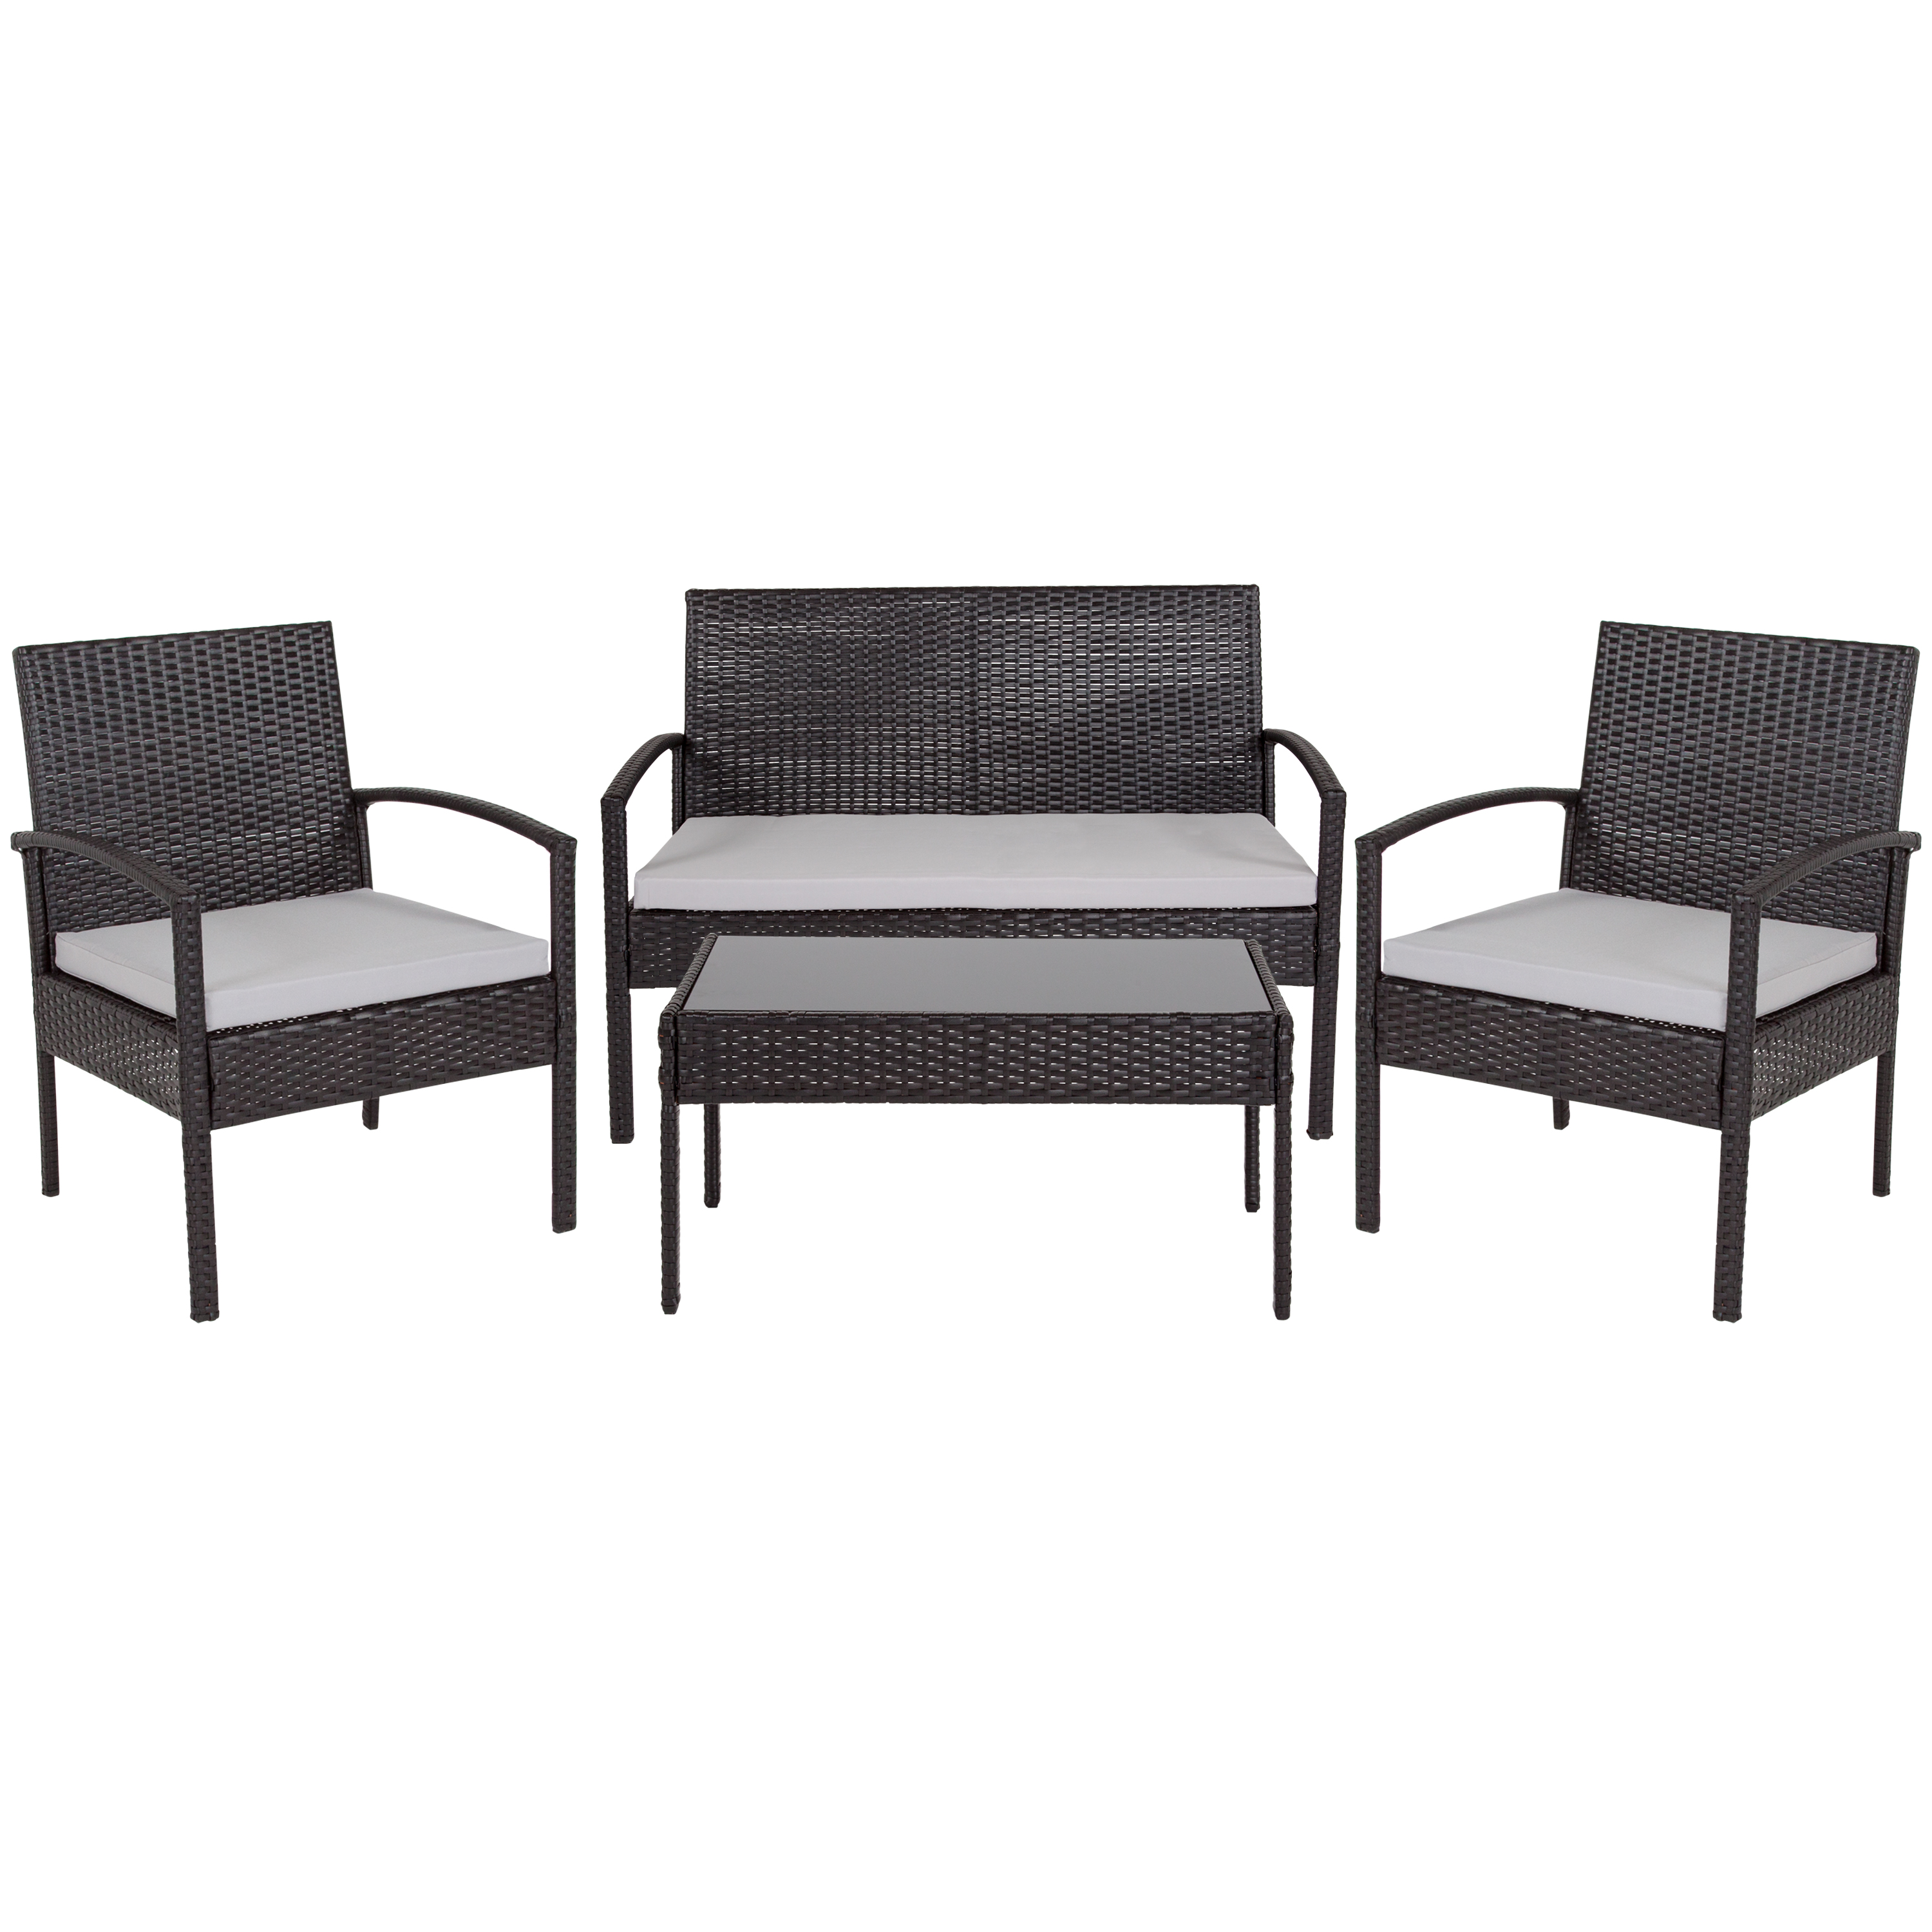 Flash Furniture JJ-S312-GG 4 Piece Black Patio Set with Steel Frame and Gray Cushions